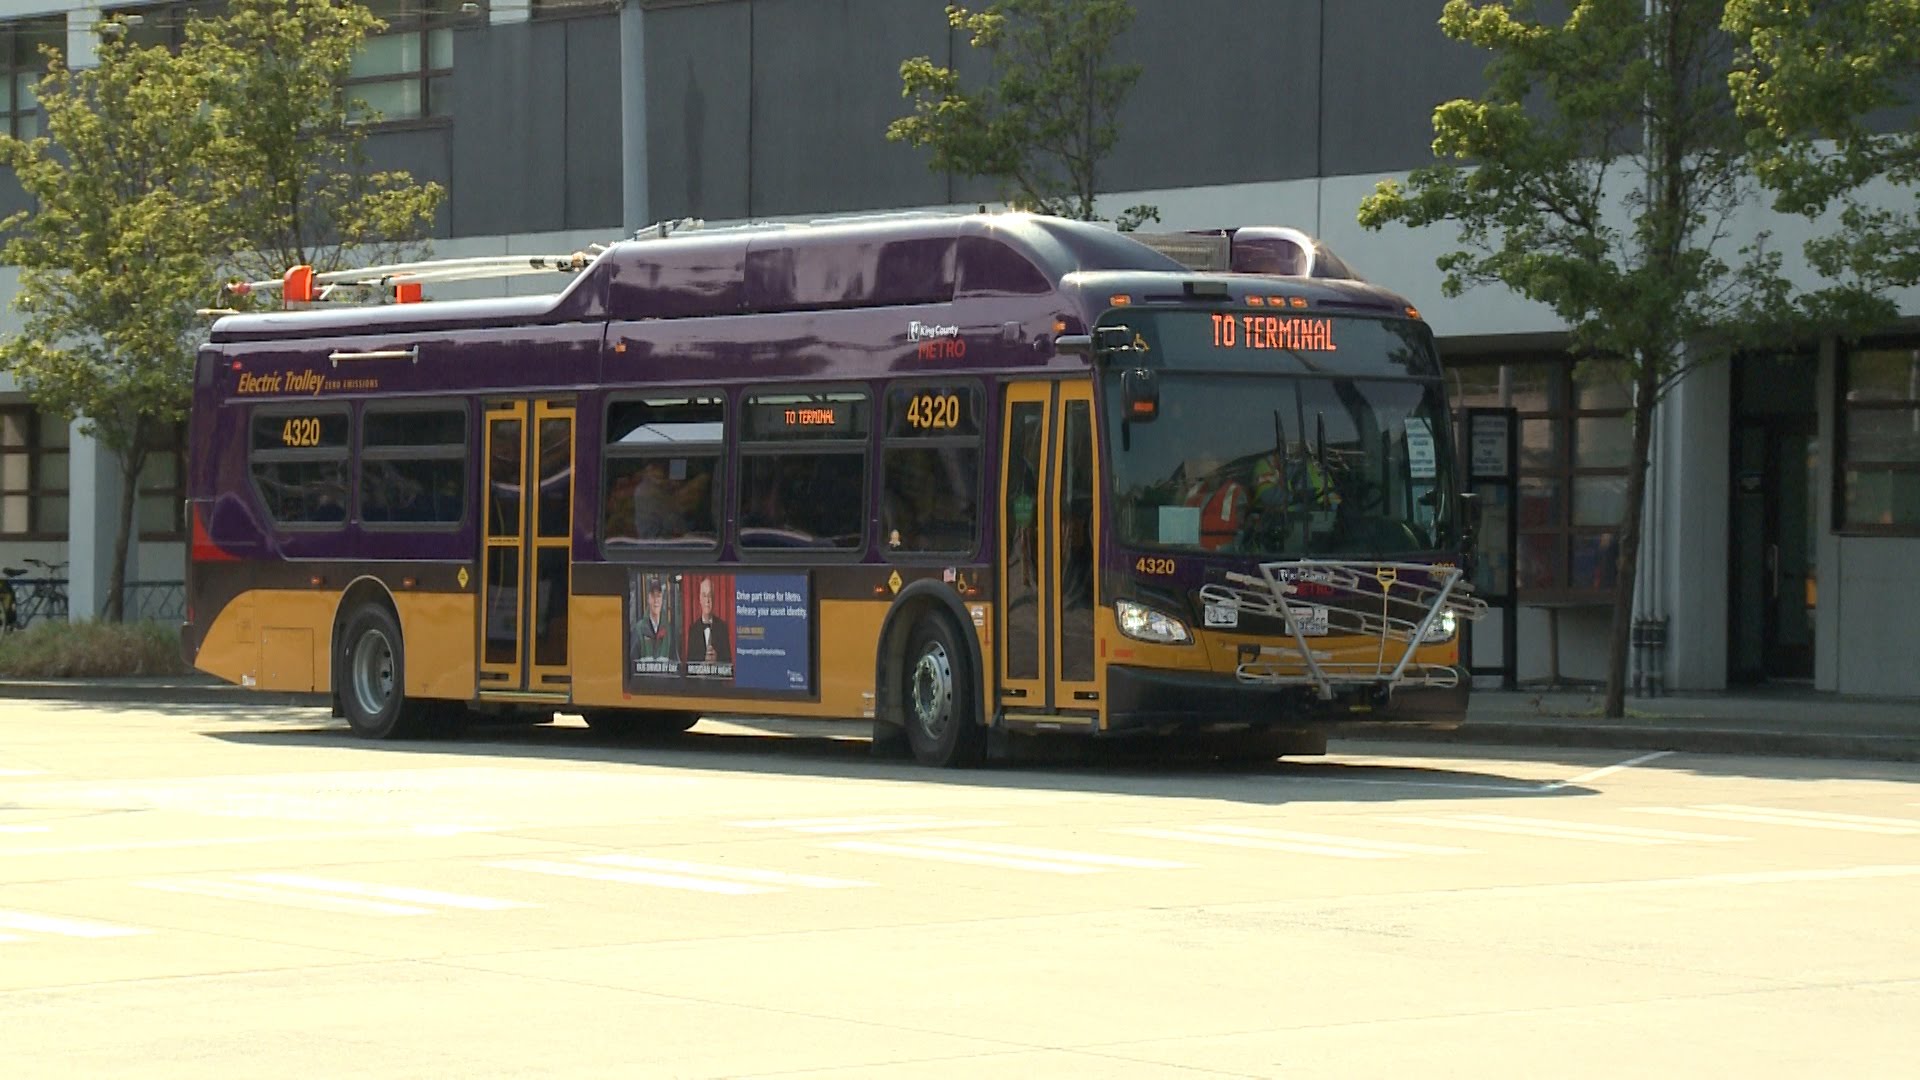 King County Metro's New Electric Trolleys - YouTube